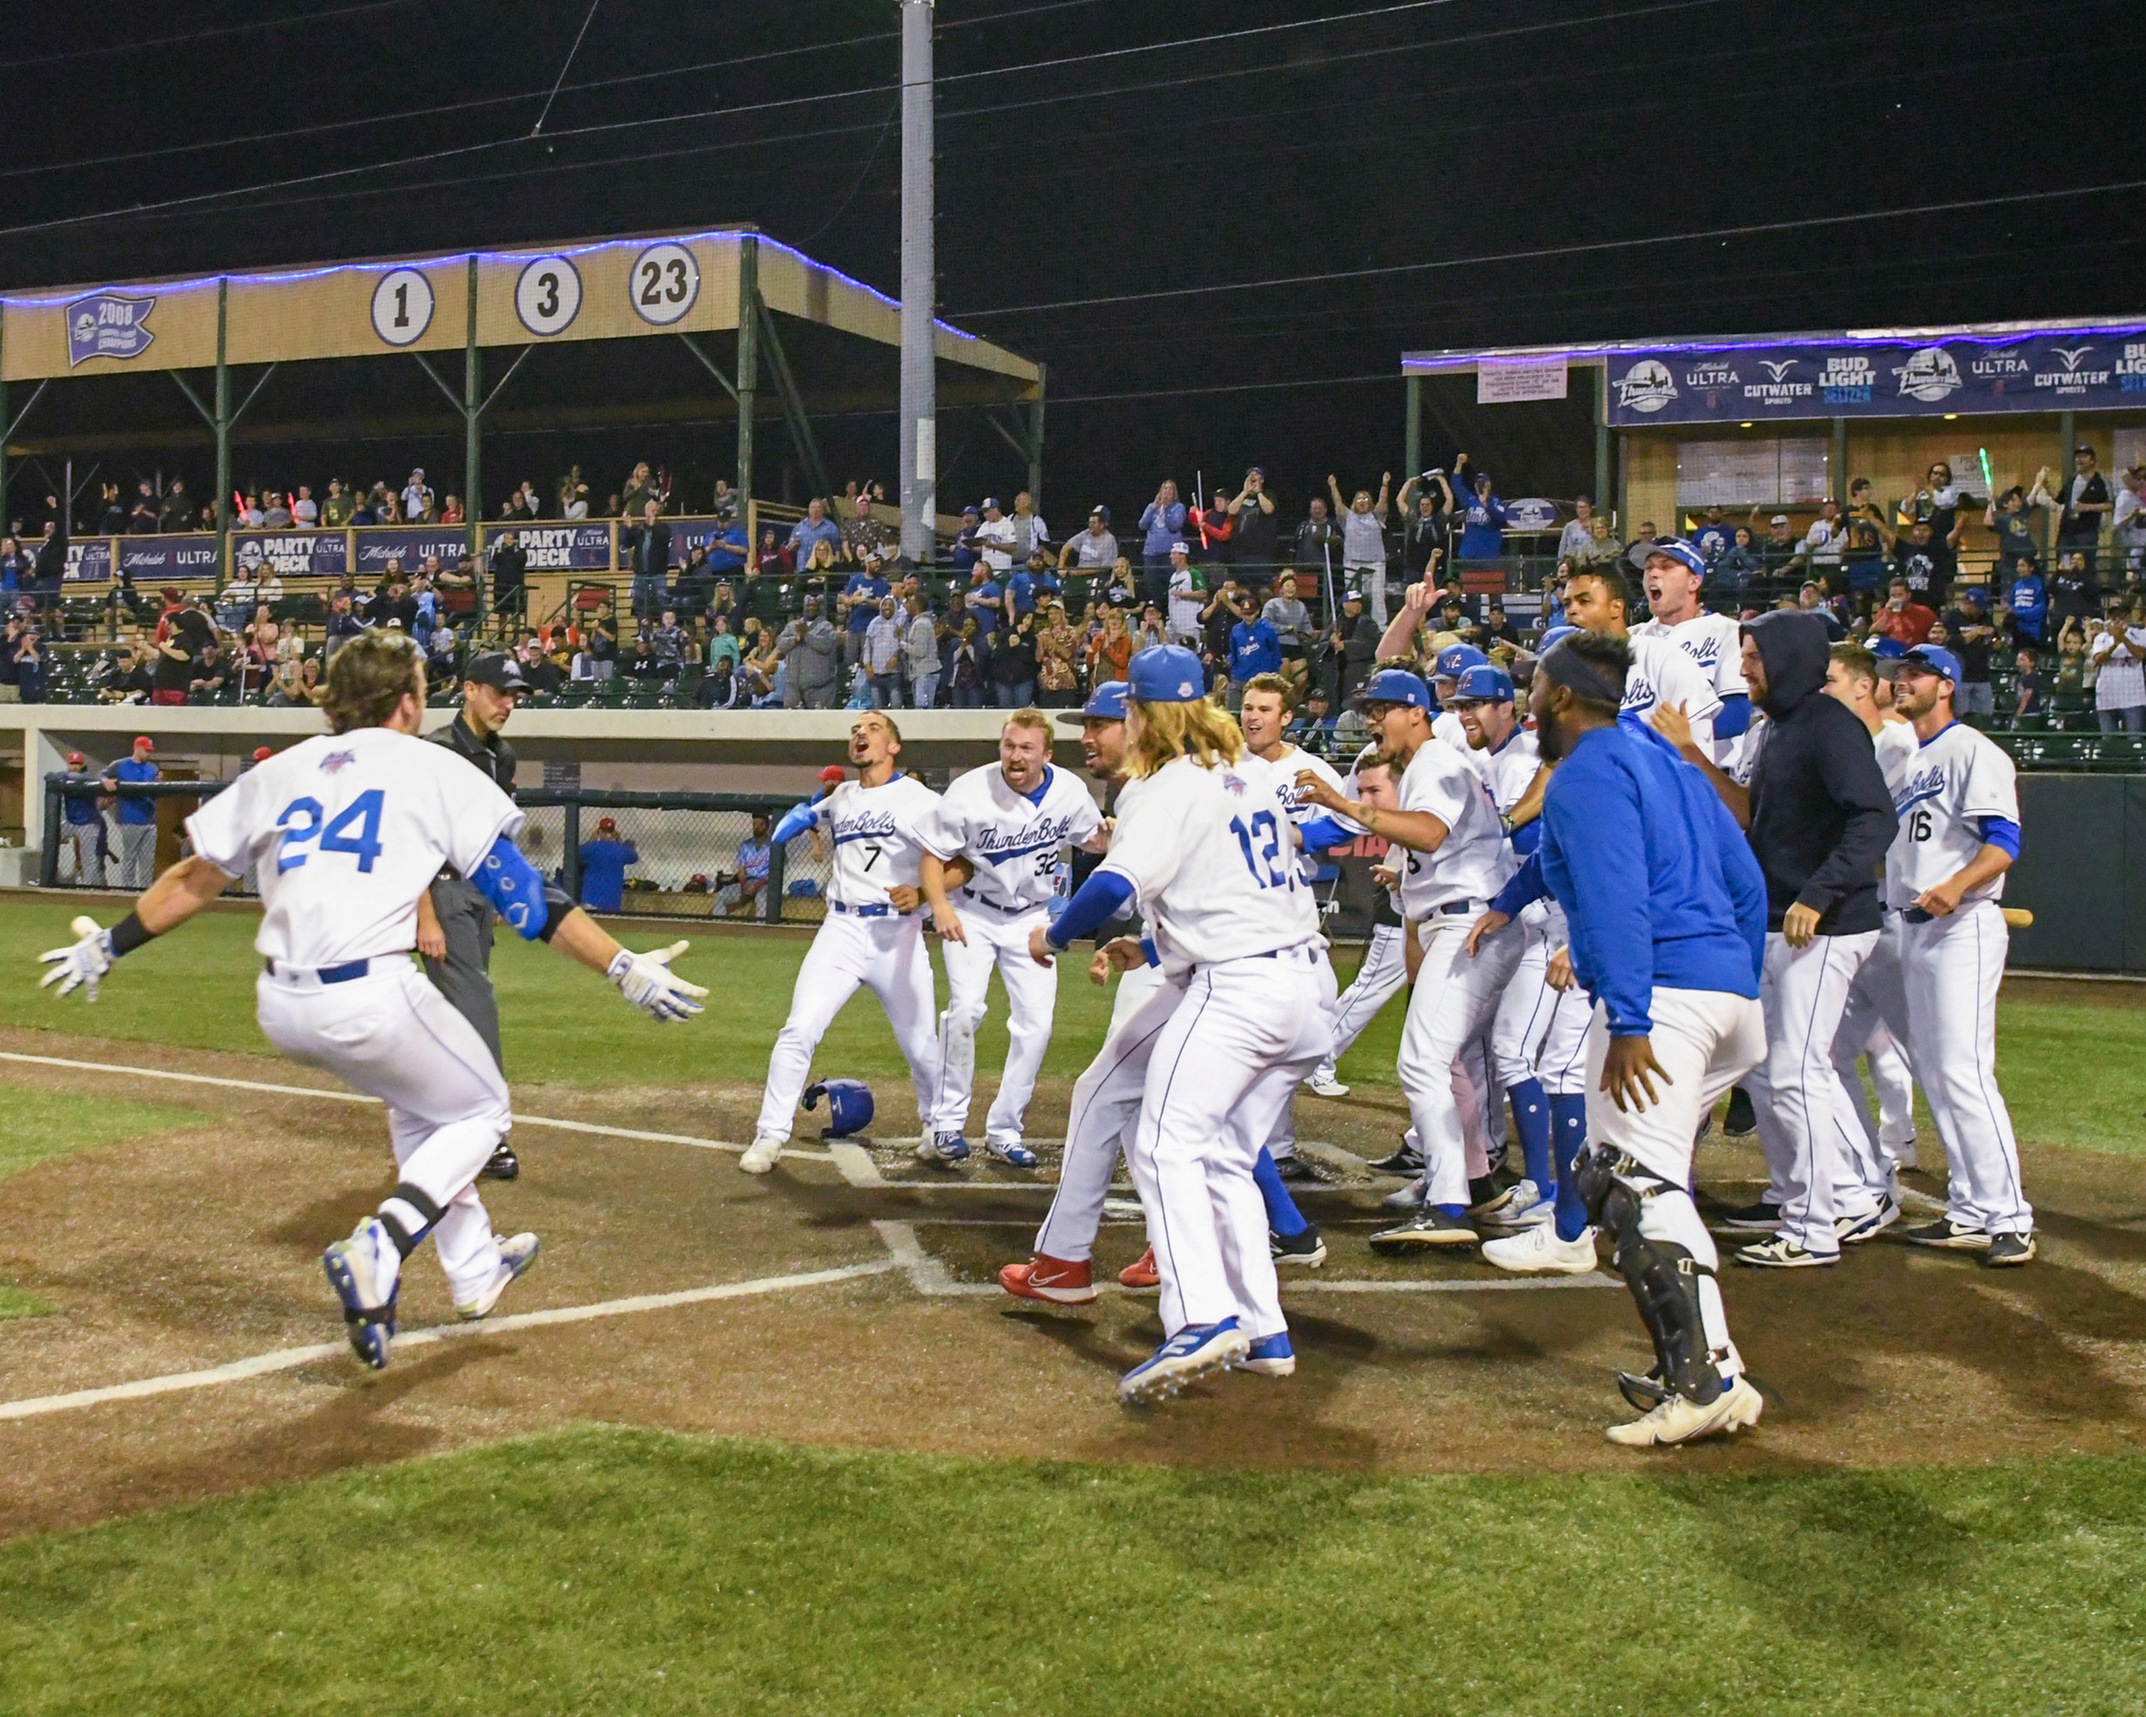 The Windy City ThunderBolts walk off the New York Boulders thanks to a 3-run homerun by Daryl Myers in extra innings.